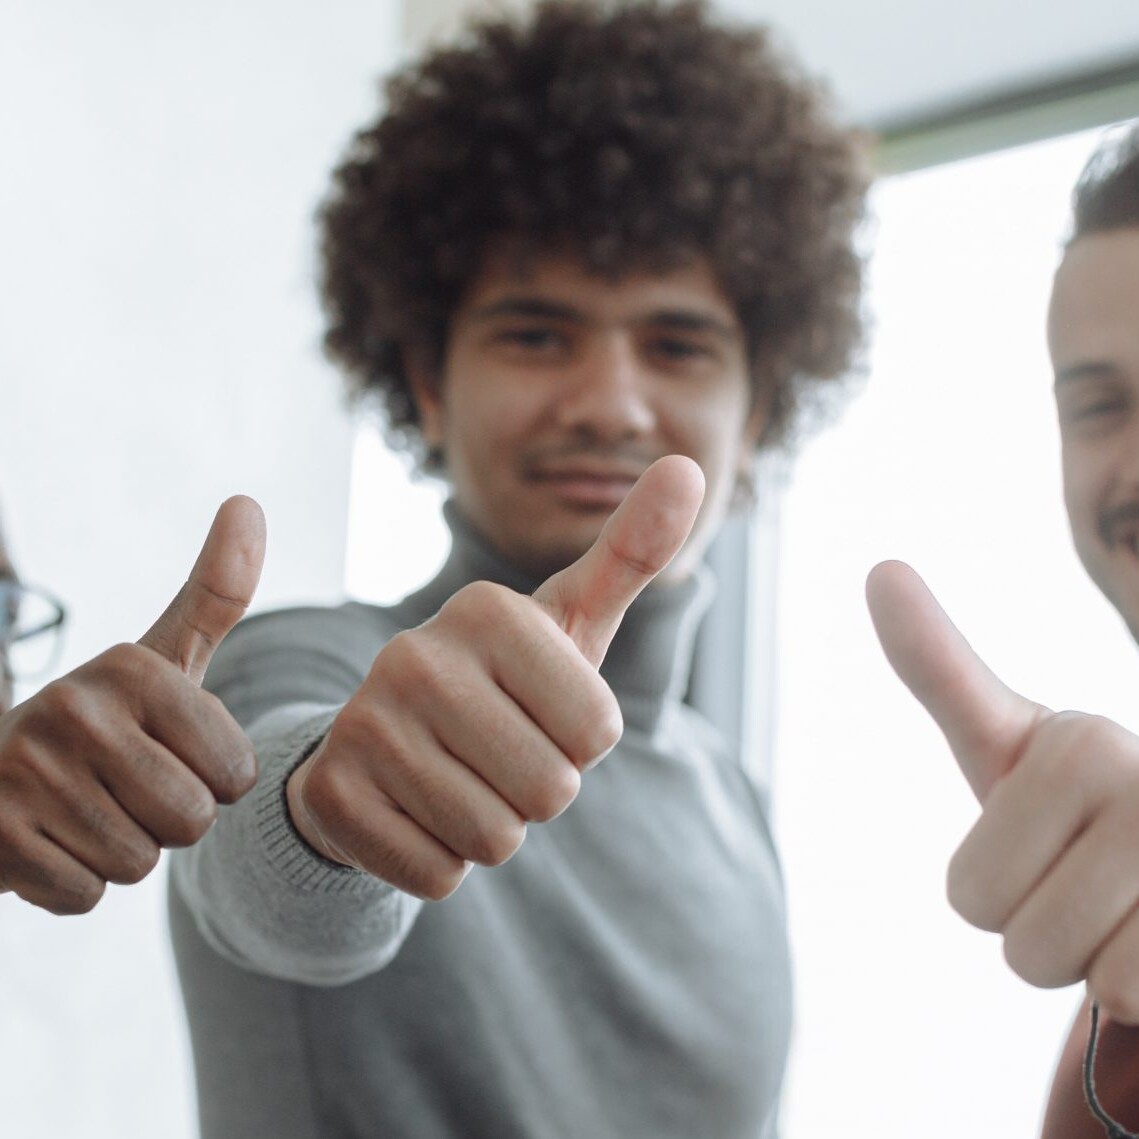 3 men giving a thumbs up for successful qualitative research